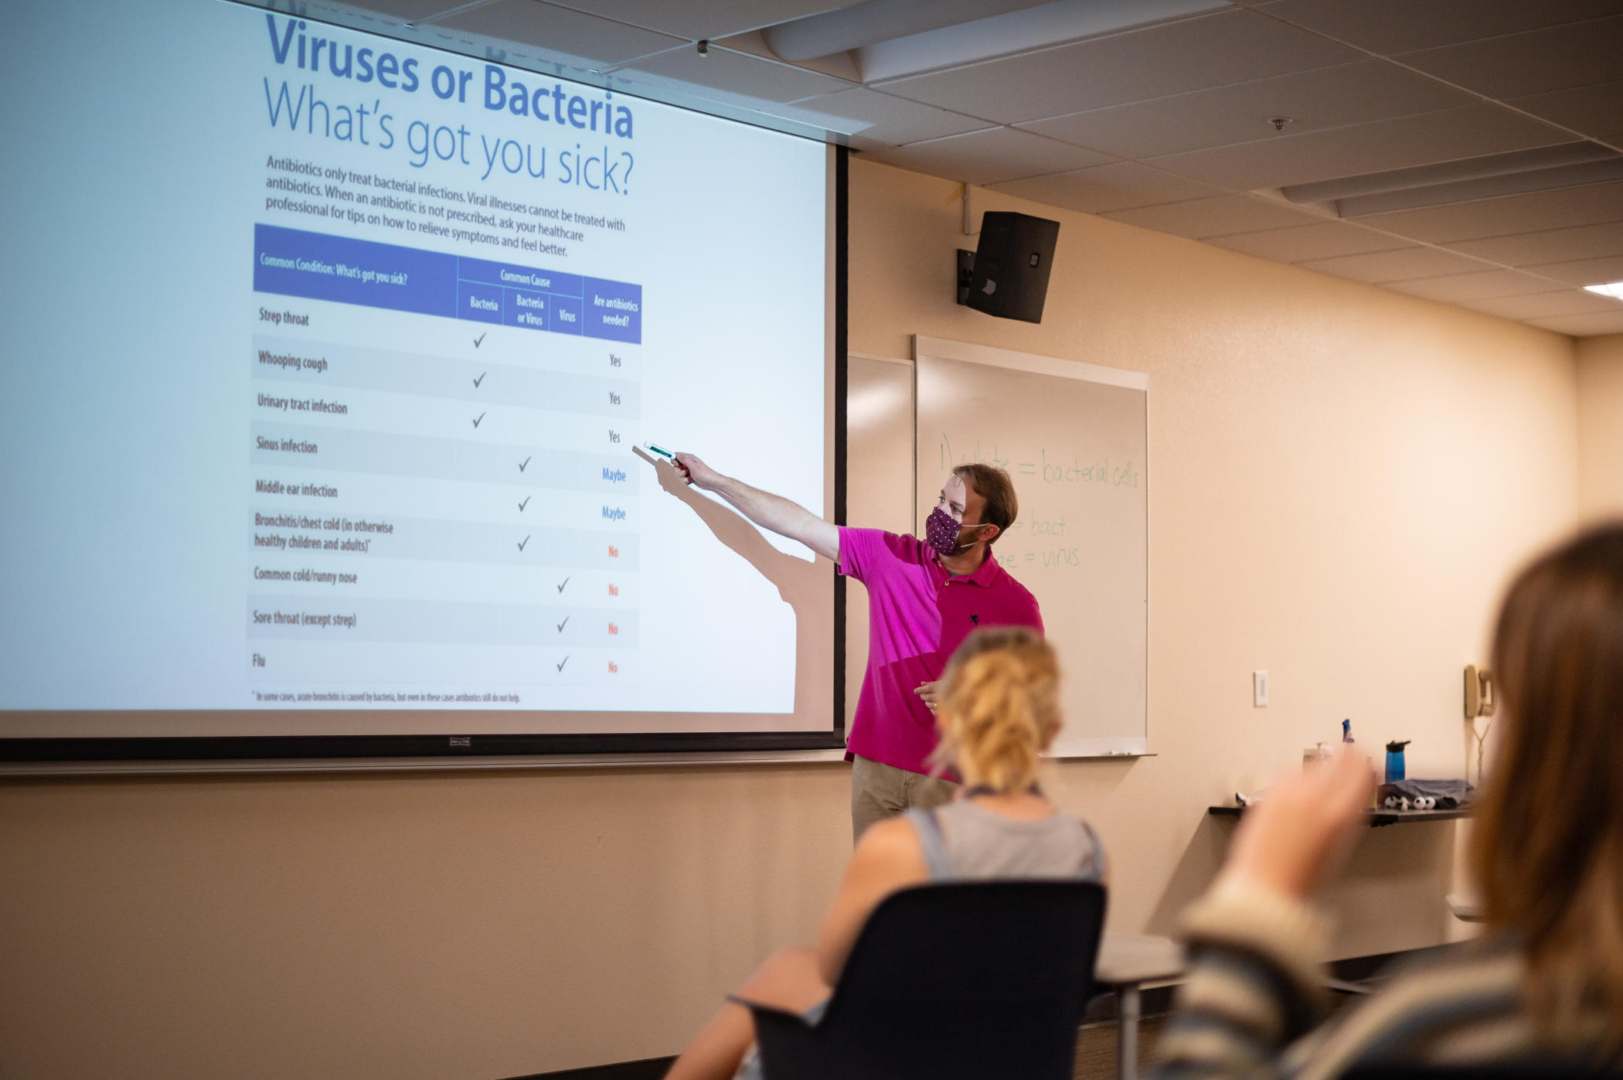 Troy Cline stands in front of a projector screen discussing the differences between virus- and bacteria-caused illness.